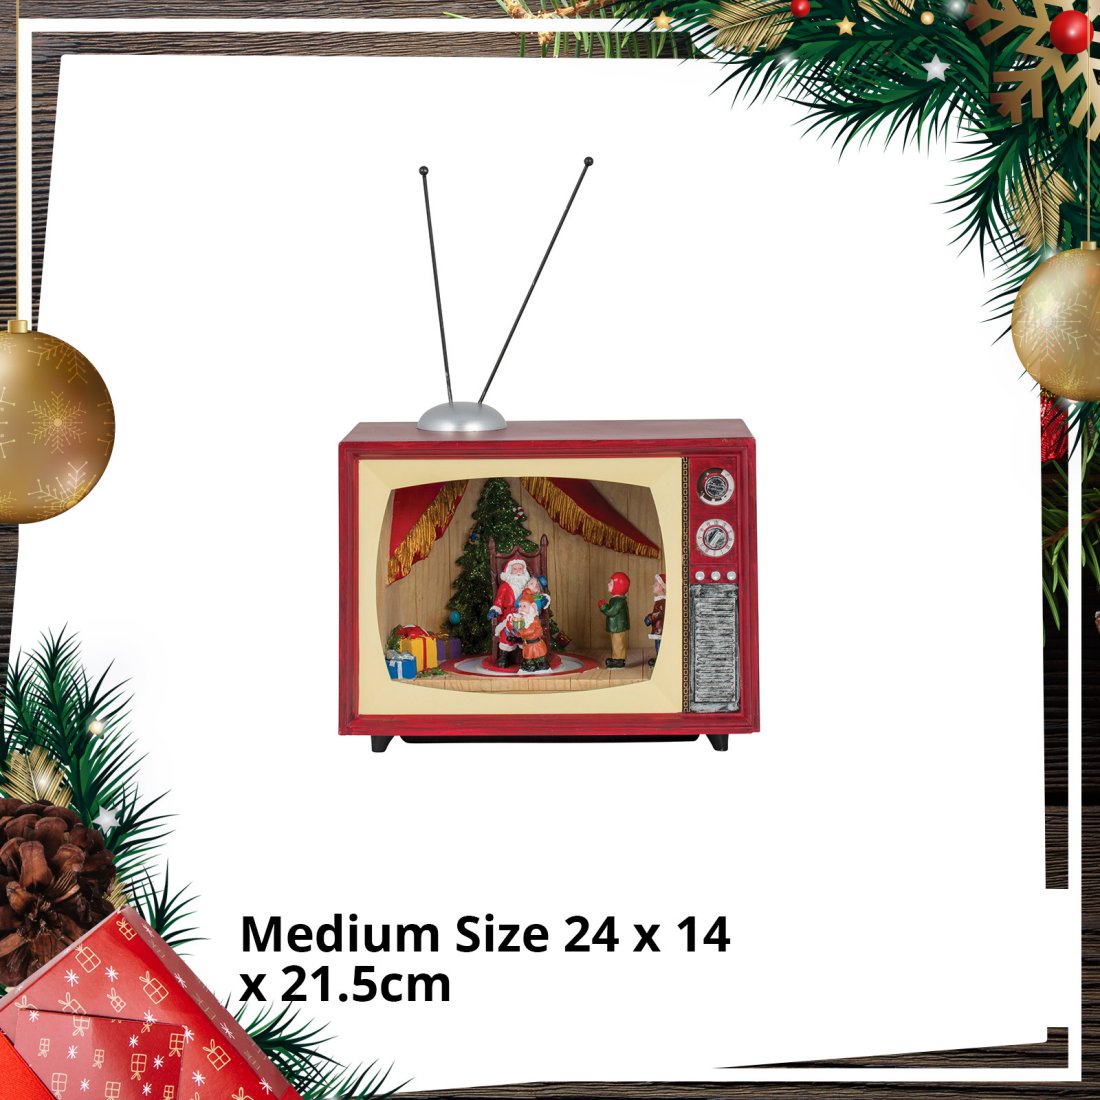 Animated Christmas LED Retro TV Television with Working Moving Scene 24cm Musical Lights